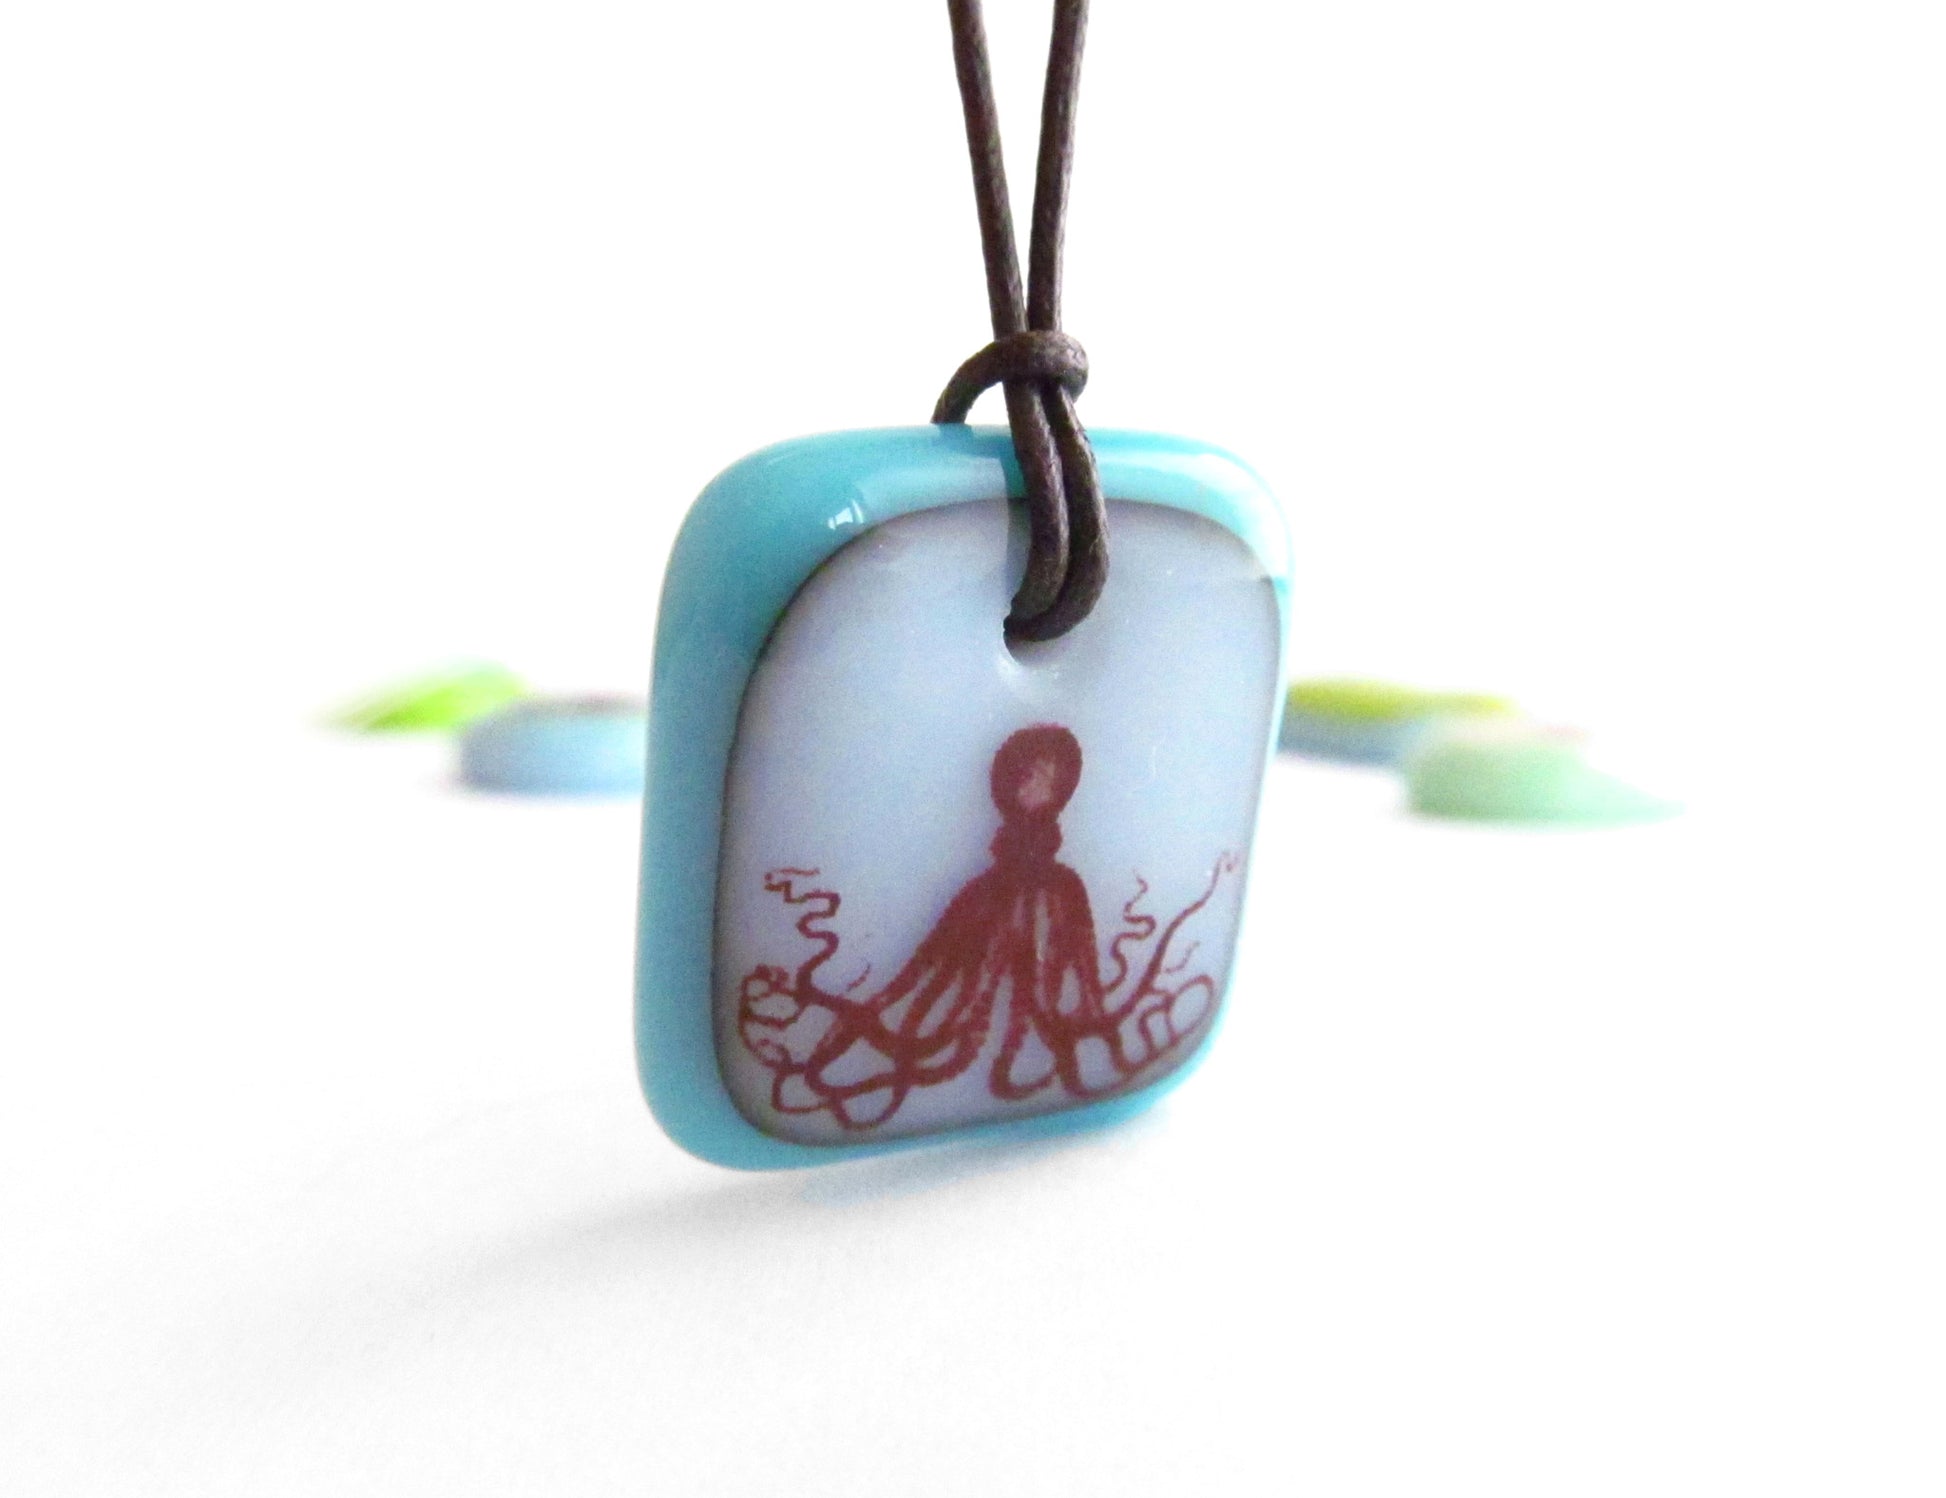 Octopus pendant necklace in turquoise and cloud white colours. 